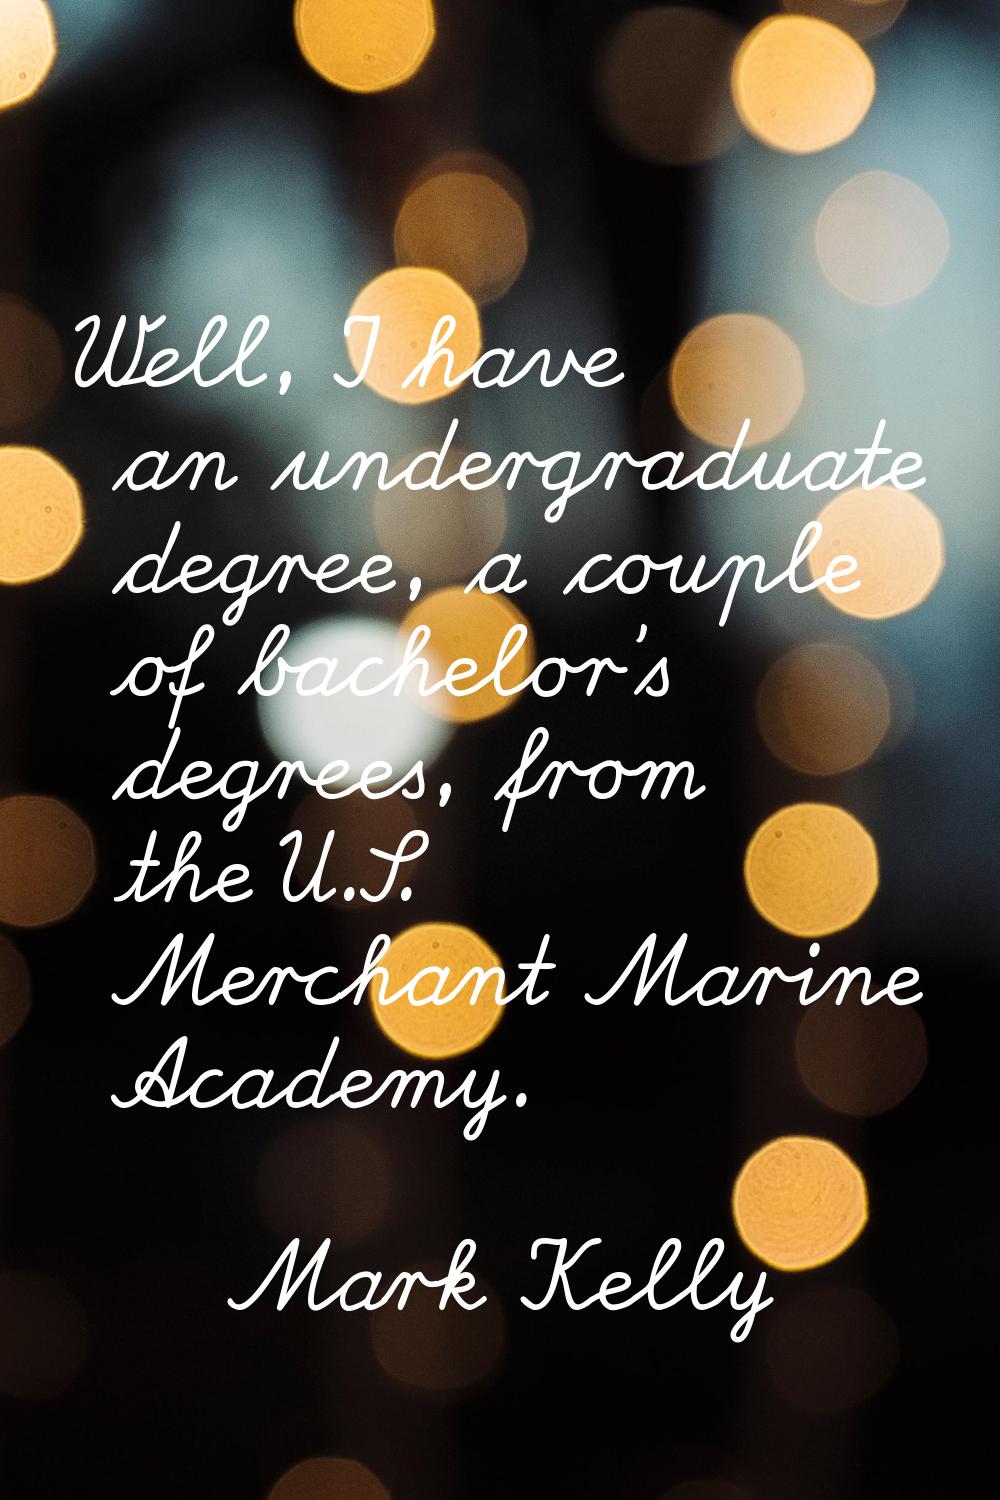 Well, I have an undergraduate degree, a couple of bachelor's degrees, from the U.S. Merchant Marine